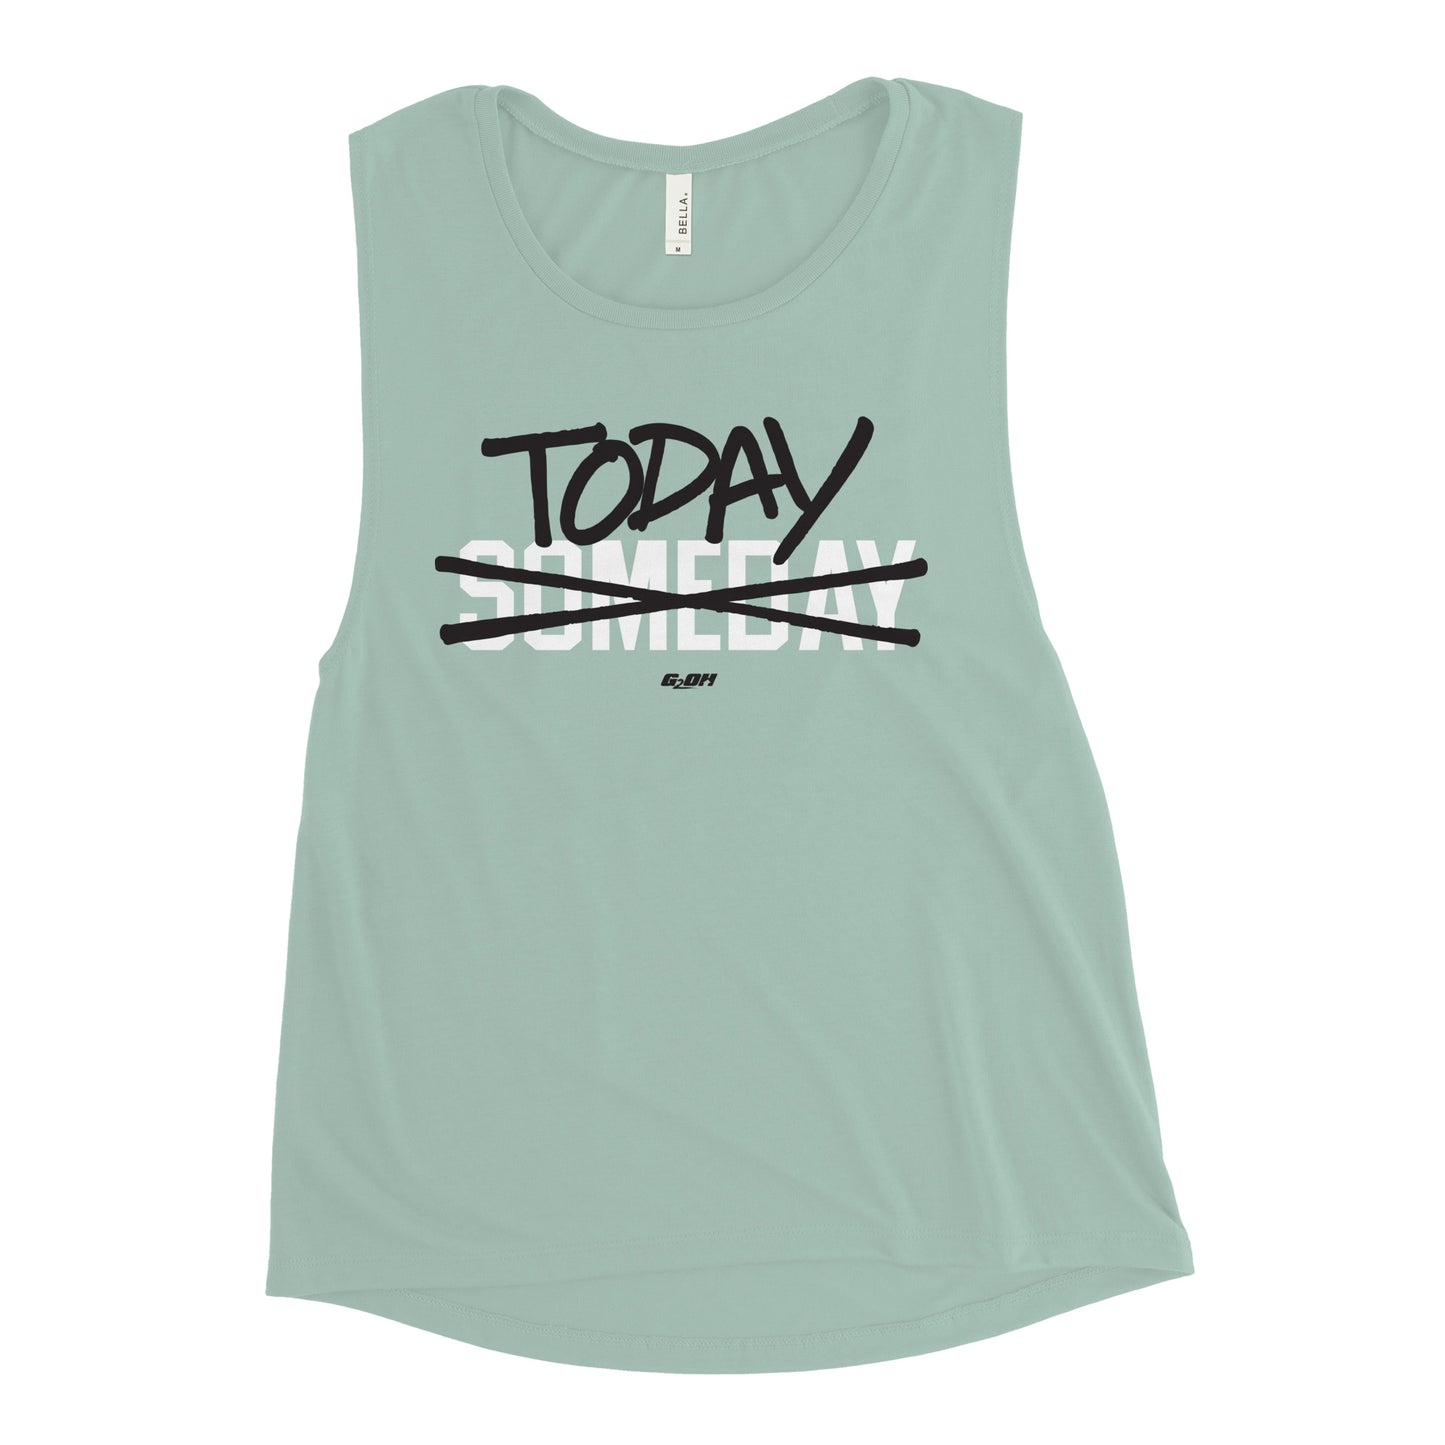 Today Not Someday Women's Muscle Tank